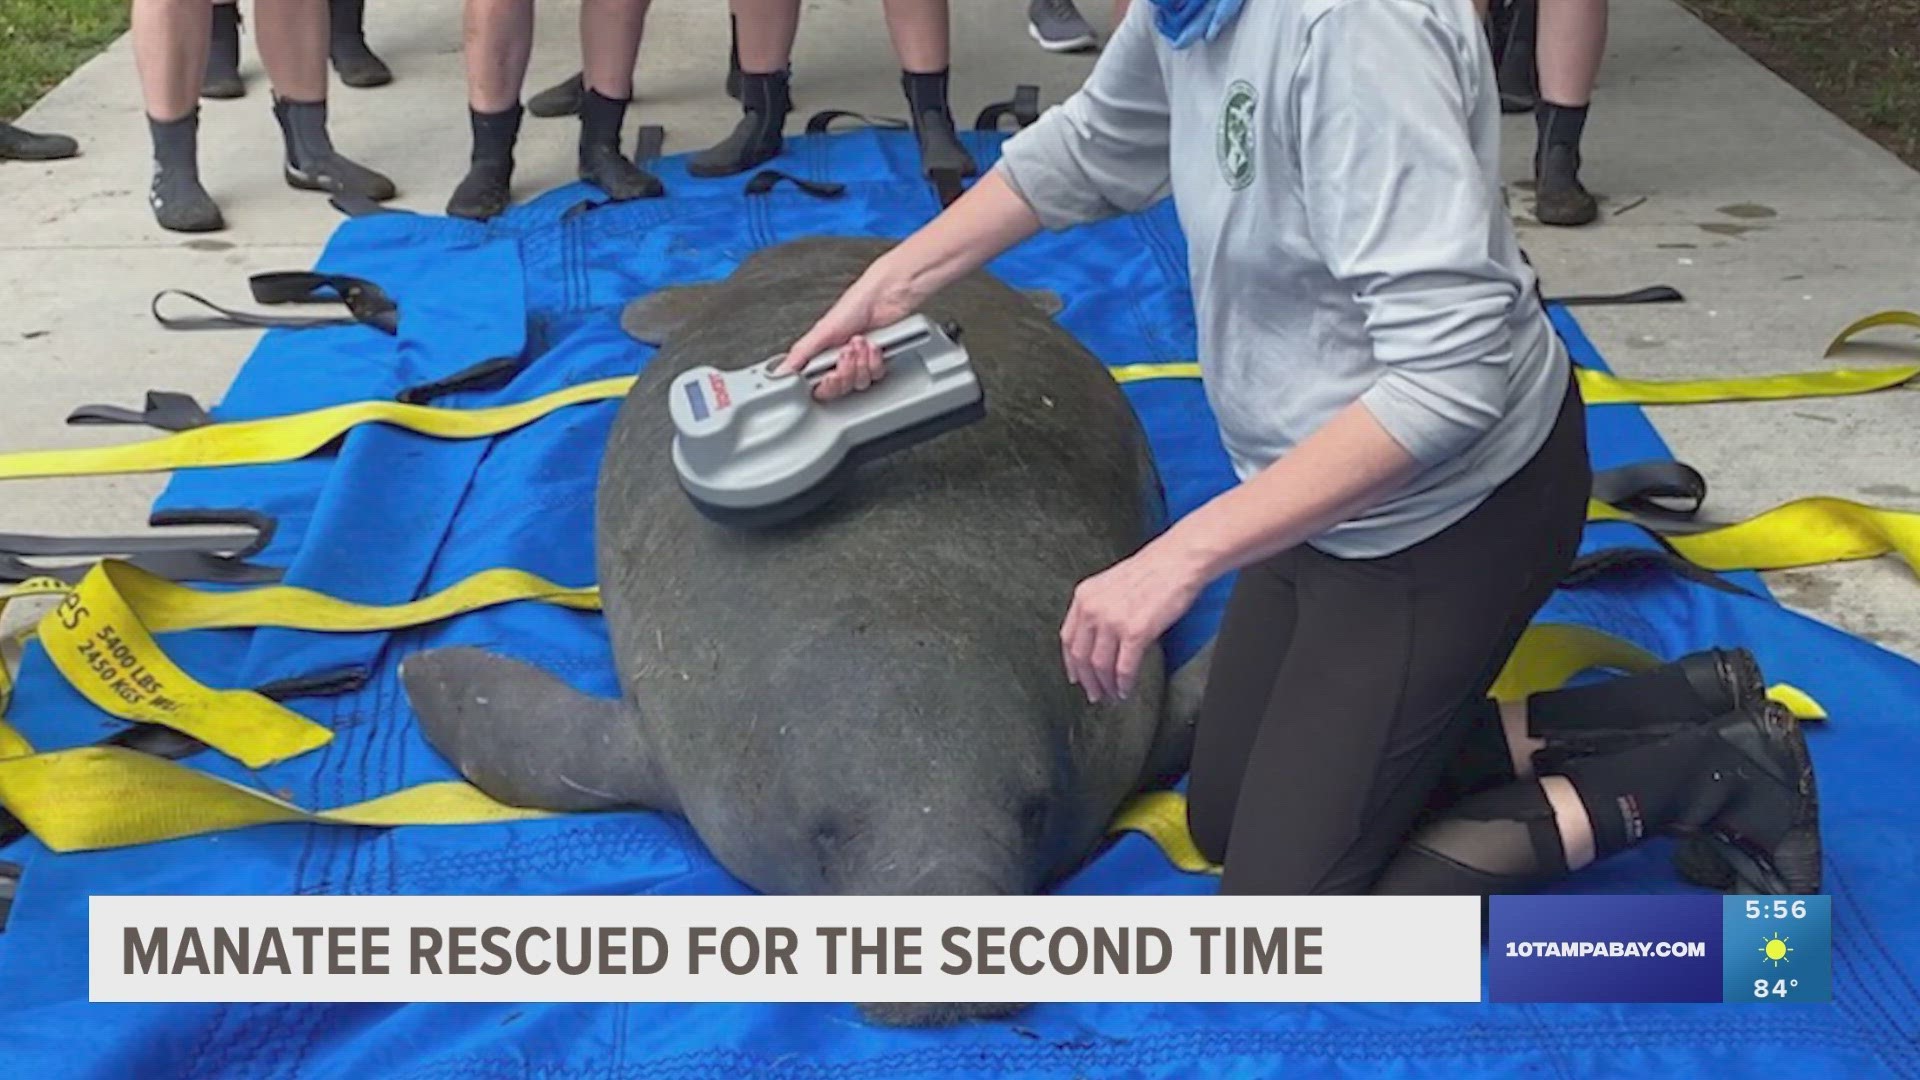 "Flapjack" the manatee was first rescued back in 2021 and again this week.